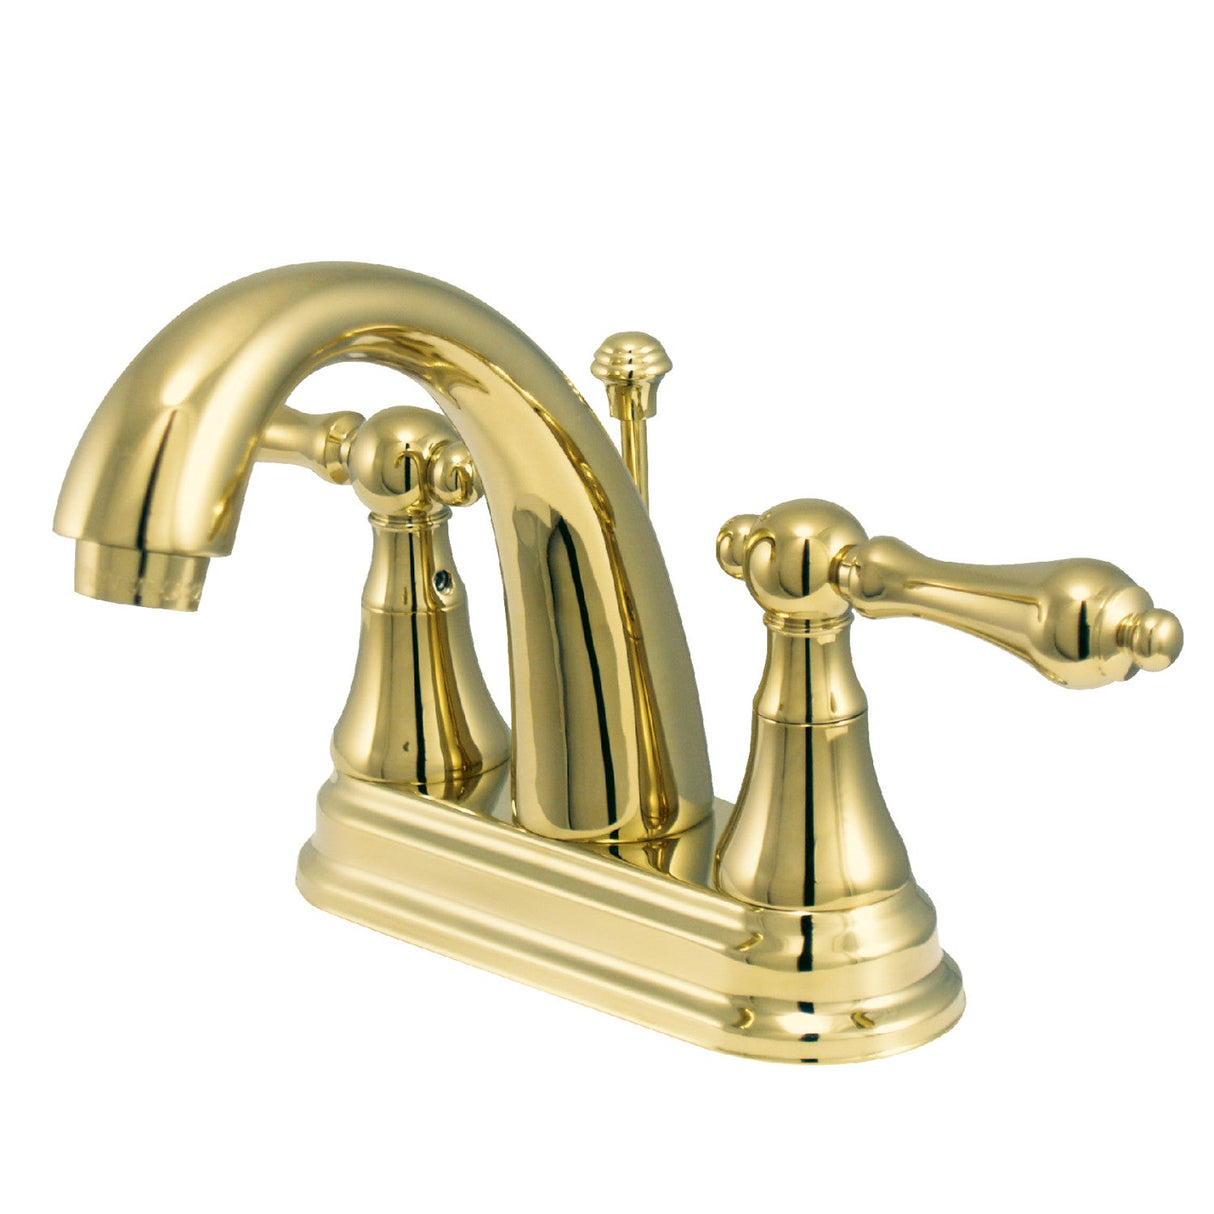 English Vintage KS7612AL Two-Handle 3-Hole Deck Mount 4" Centerset Bathroom Faucet with Brass Pop-Up, Polished Brass